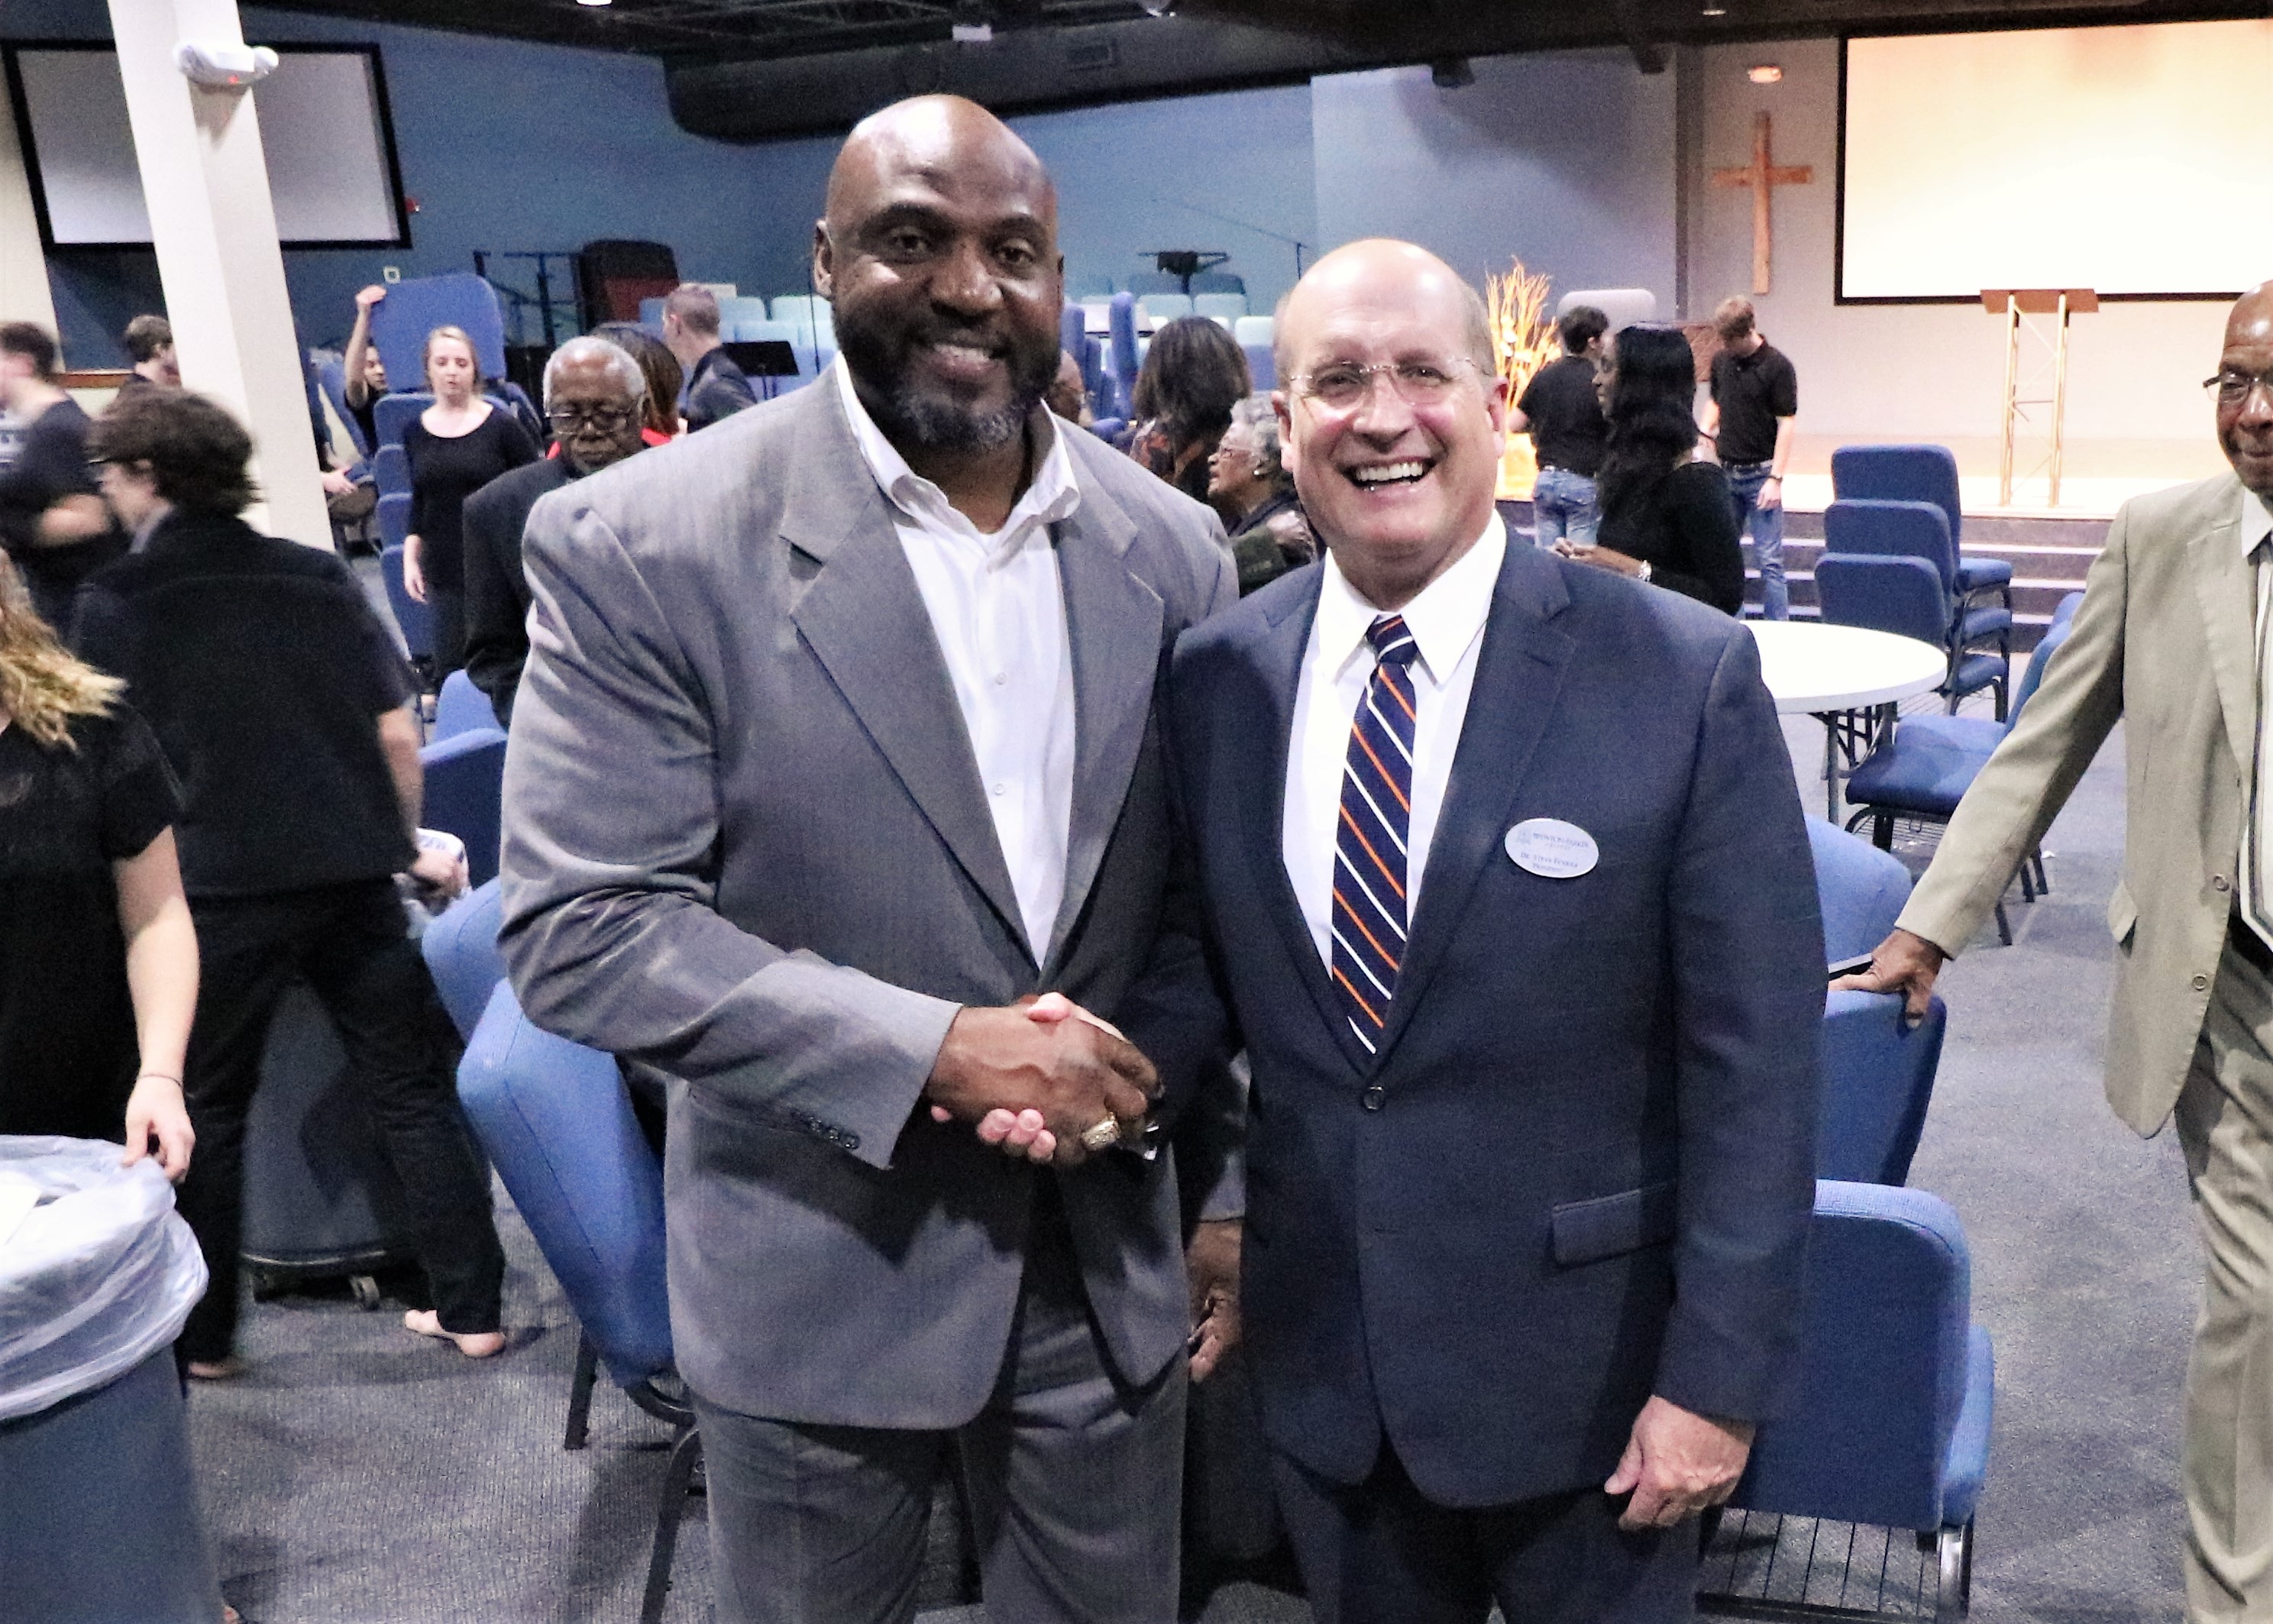 Fred Stokes, former NFL player and a native to Vidalia, Ga, poses with Dr. Steve Echols, president of Brewton-Parker College at the Warren C. Crawley Sr. Celebration of Heritage Banquet on February 3, 2018. Stokes’s humor and storytelling engaged the audience as he delivered a powerful speech on actions that are done in secret.